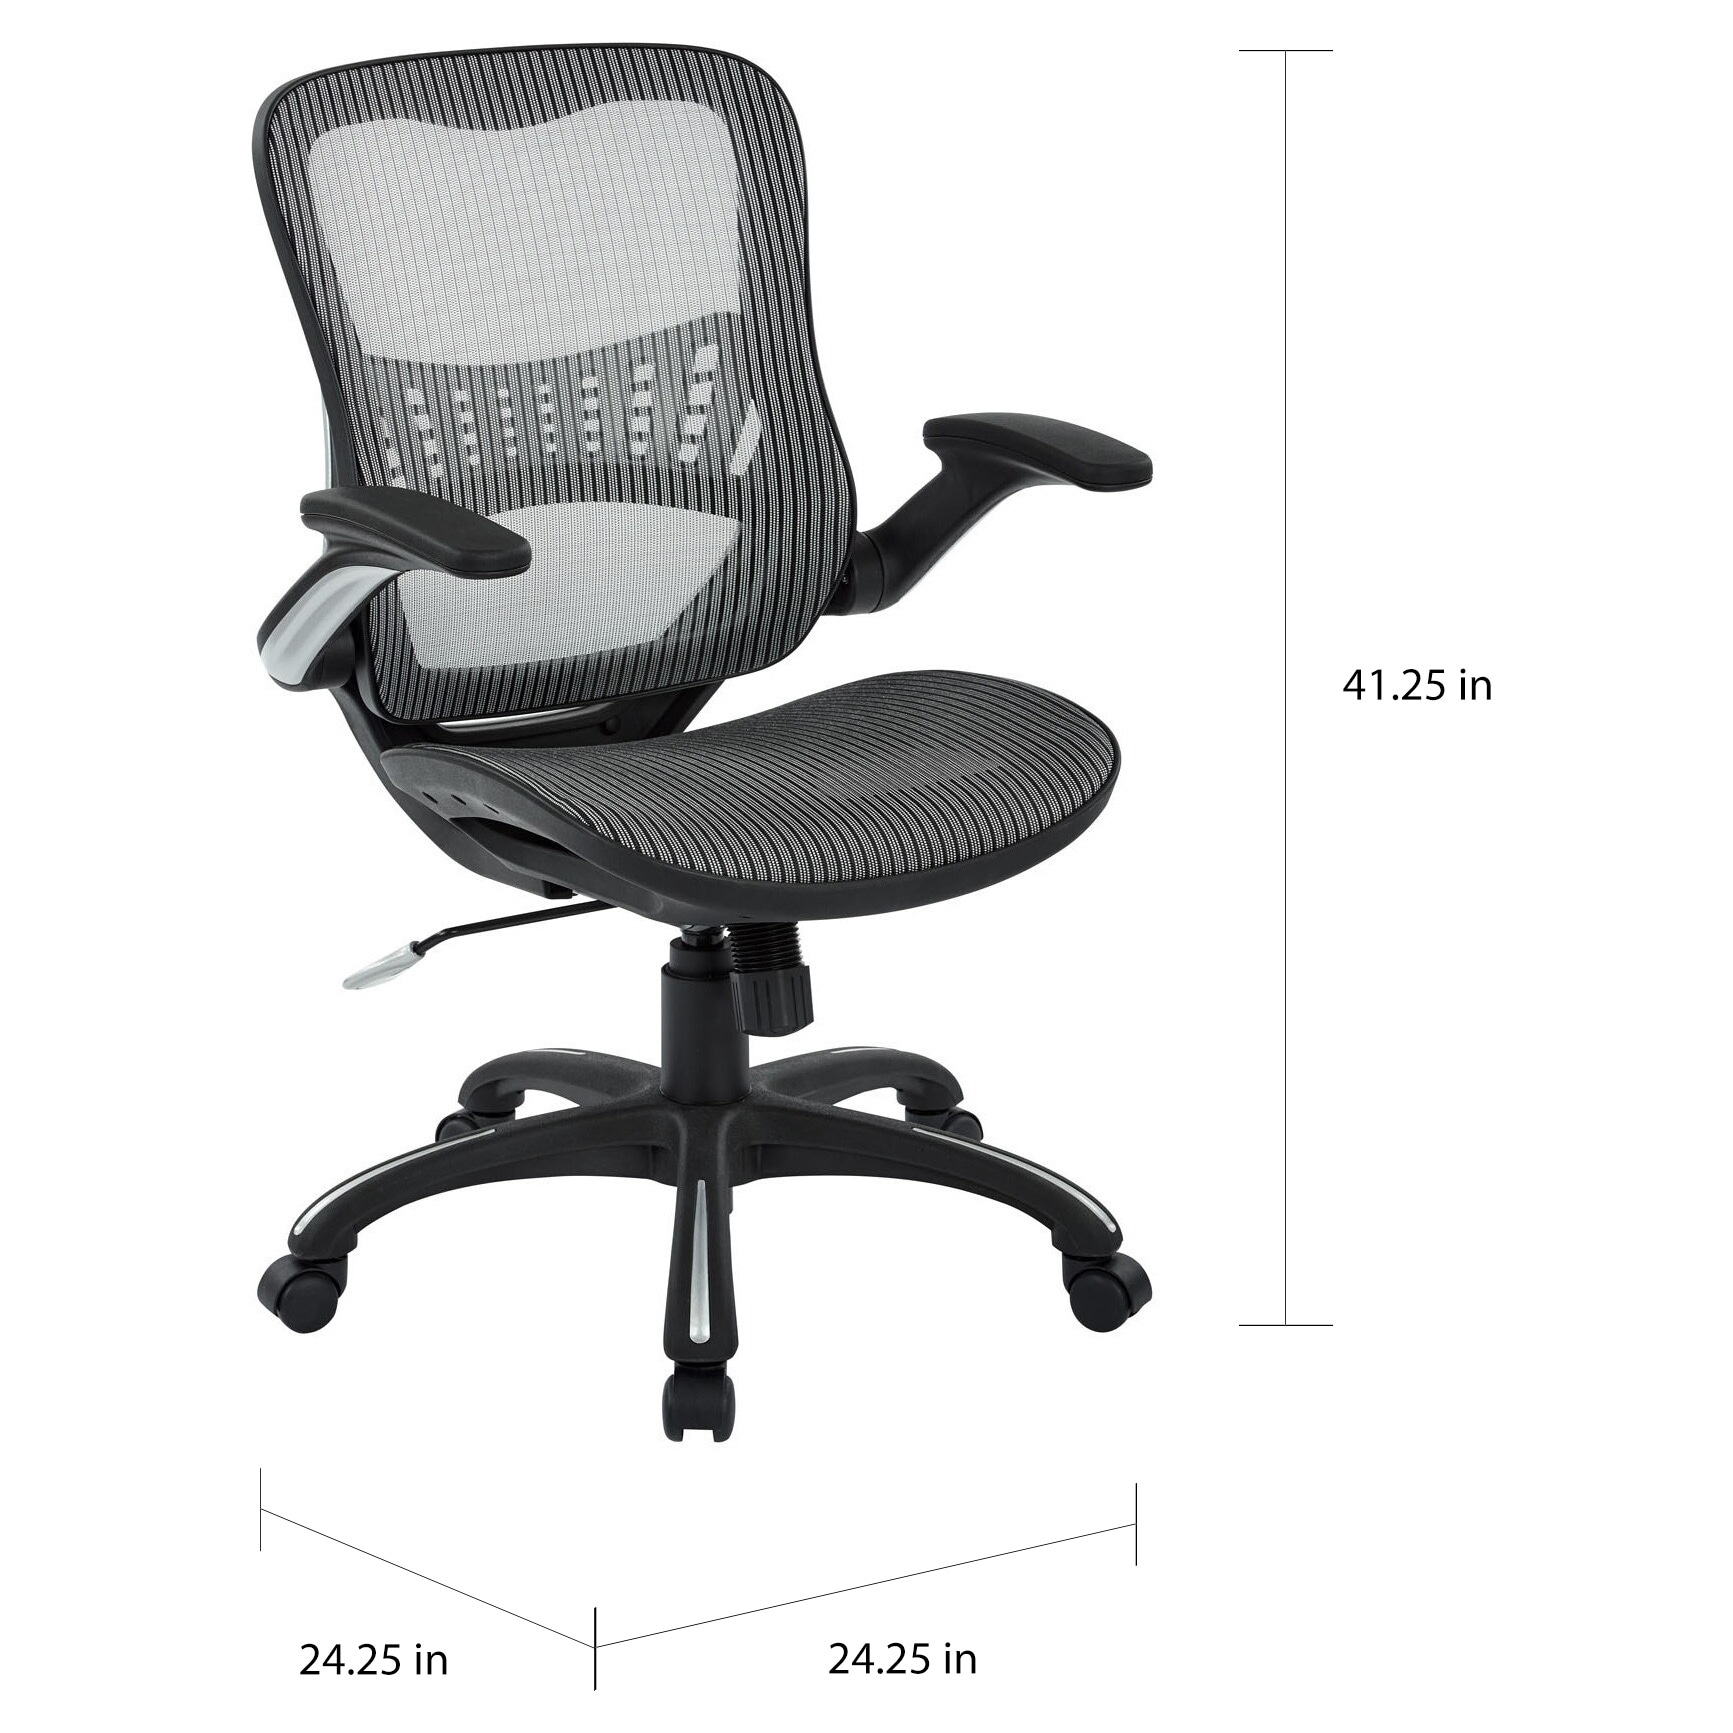 https://ak1.ostkcdn.com/images/products/is/images/direct/d95b807e0a4102c5b441ca173389e2831f078349/Office-Star-Mesh-Ergonomic-Manager%27s-Chair.jpg